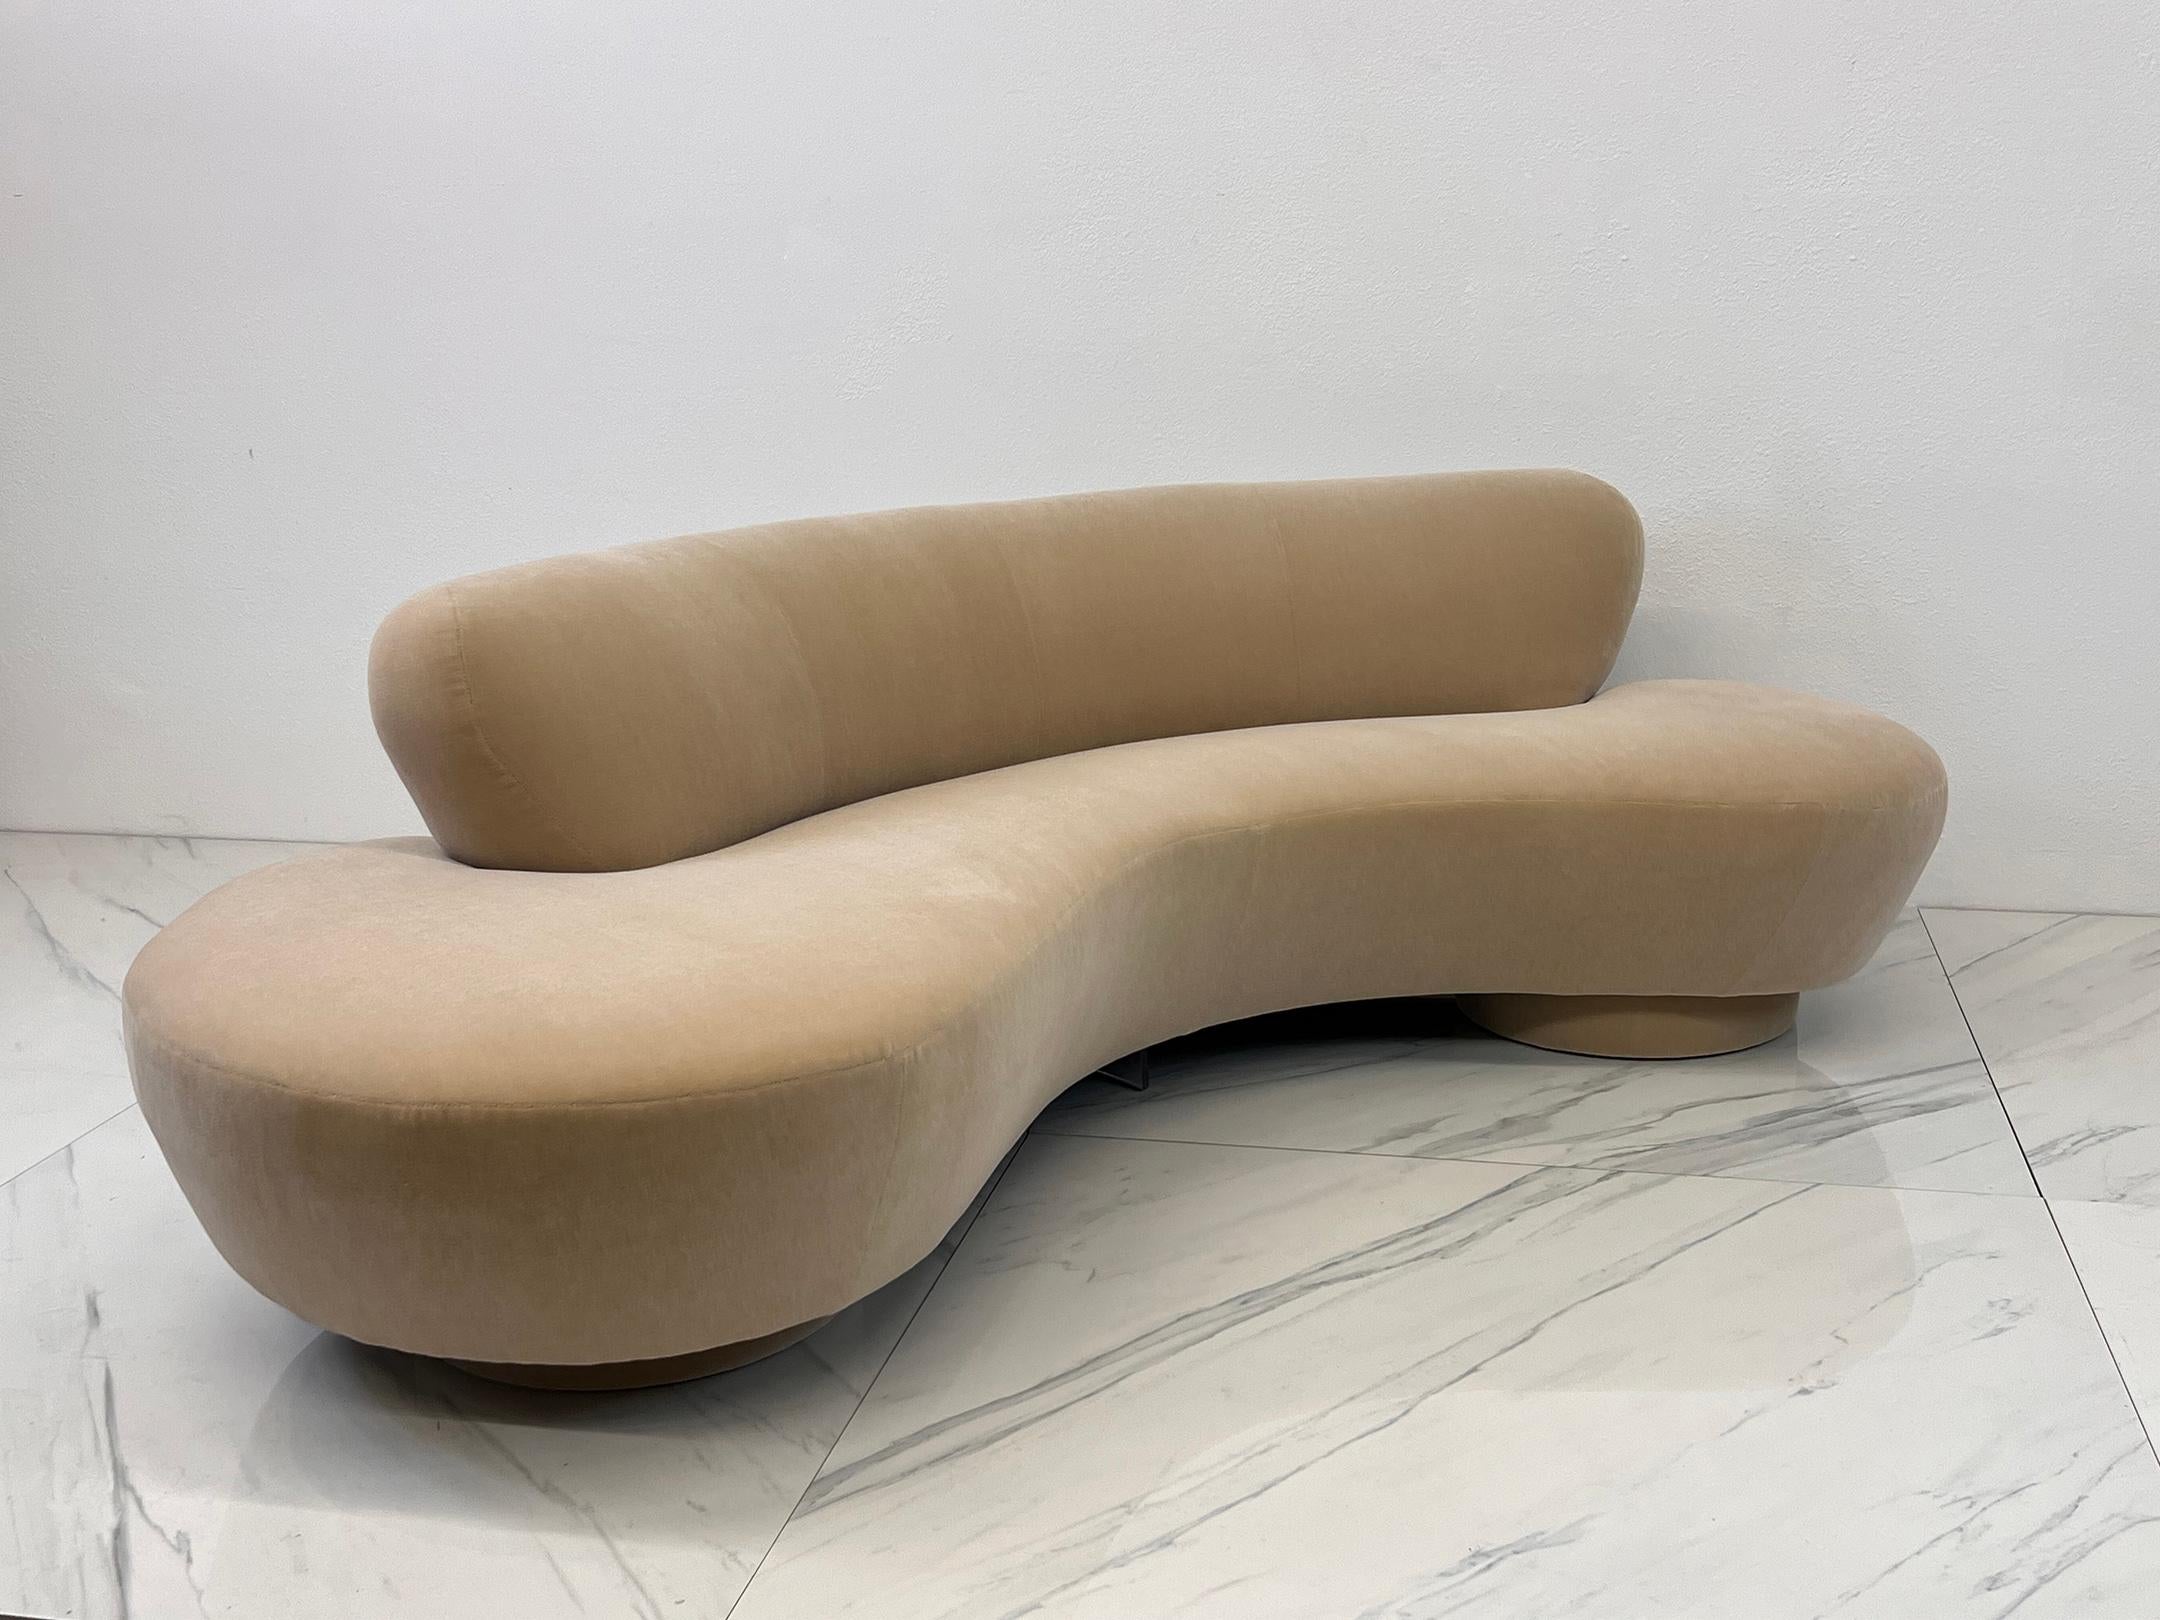 Late 20th Century Vladimir Kagan Serpentine Cloud Sofa for Directional in Tan Mohair For Sale